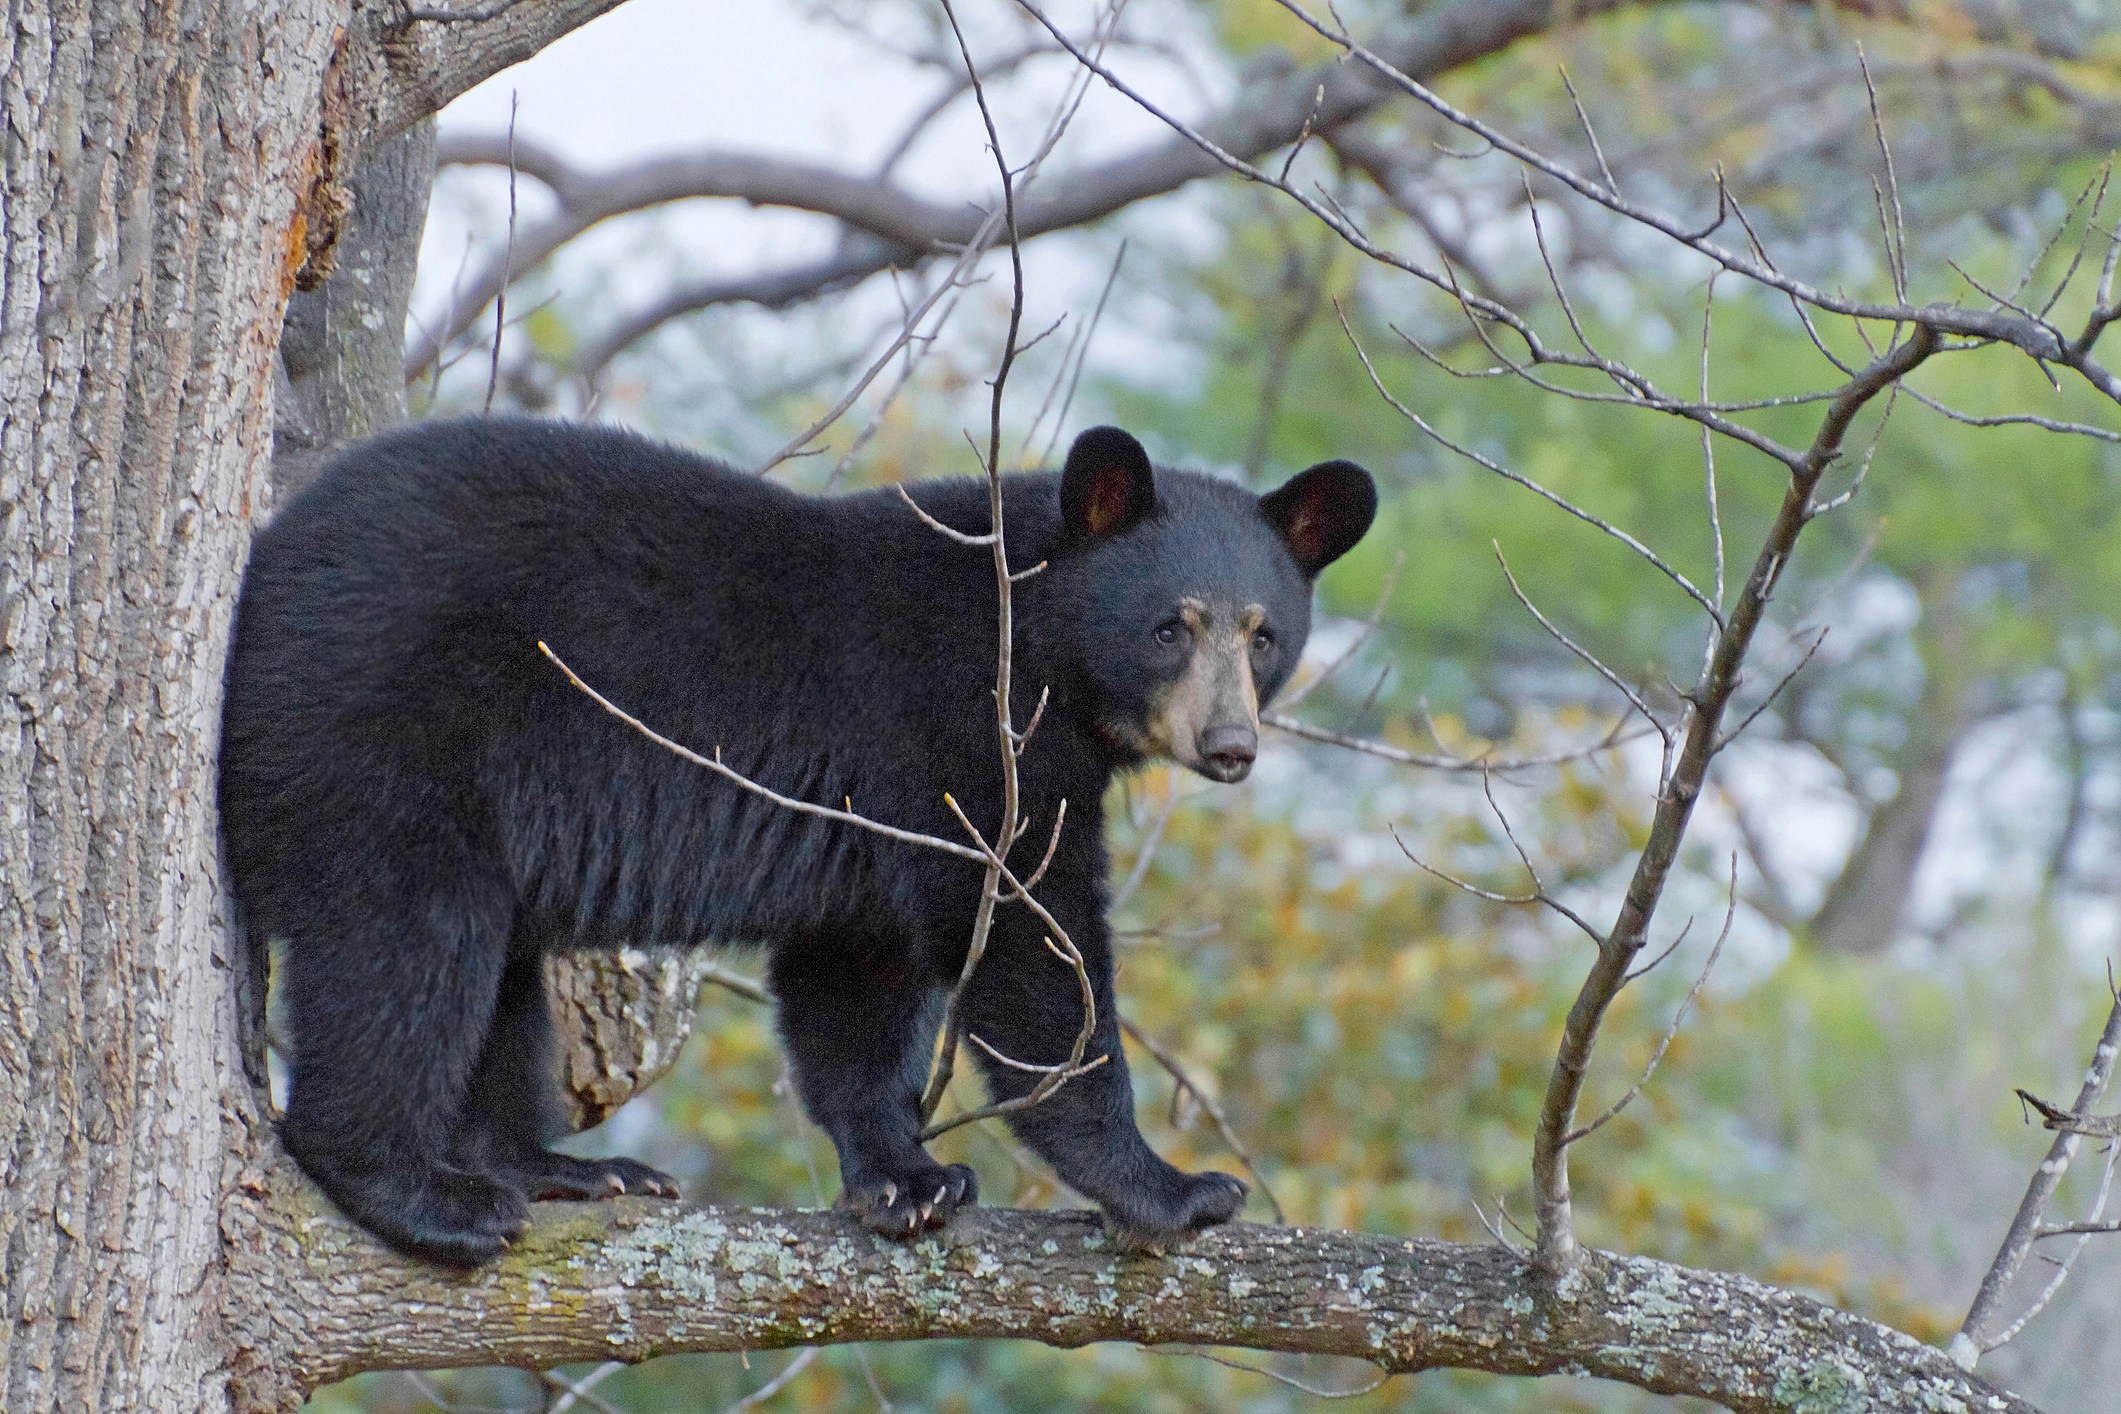 Friends of Animals  FoA to CT residents: Stop reporting black bear  sightings - Friends of Animals